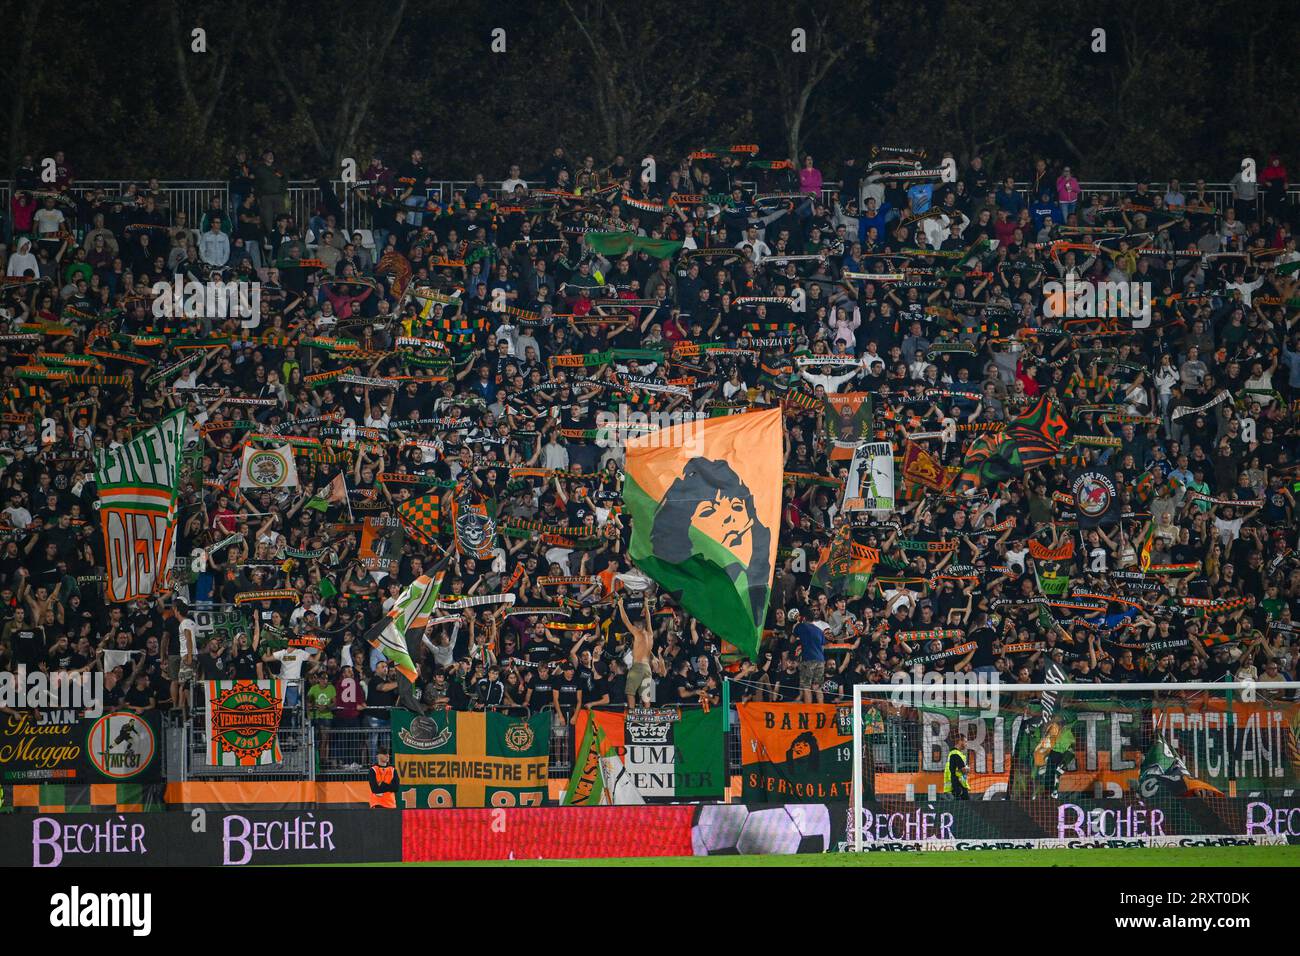 Venice, Italy. 01st May, 2023. Ceo of Modena Carlo Rivetti and Simone Pavan  during Venezia FC vs Modena FC, Italian soccer Serie B match in Venice,  Italy, May 01 2023 Credit: Independent